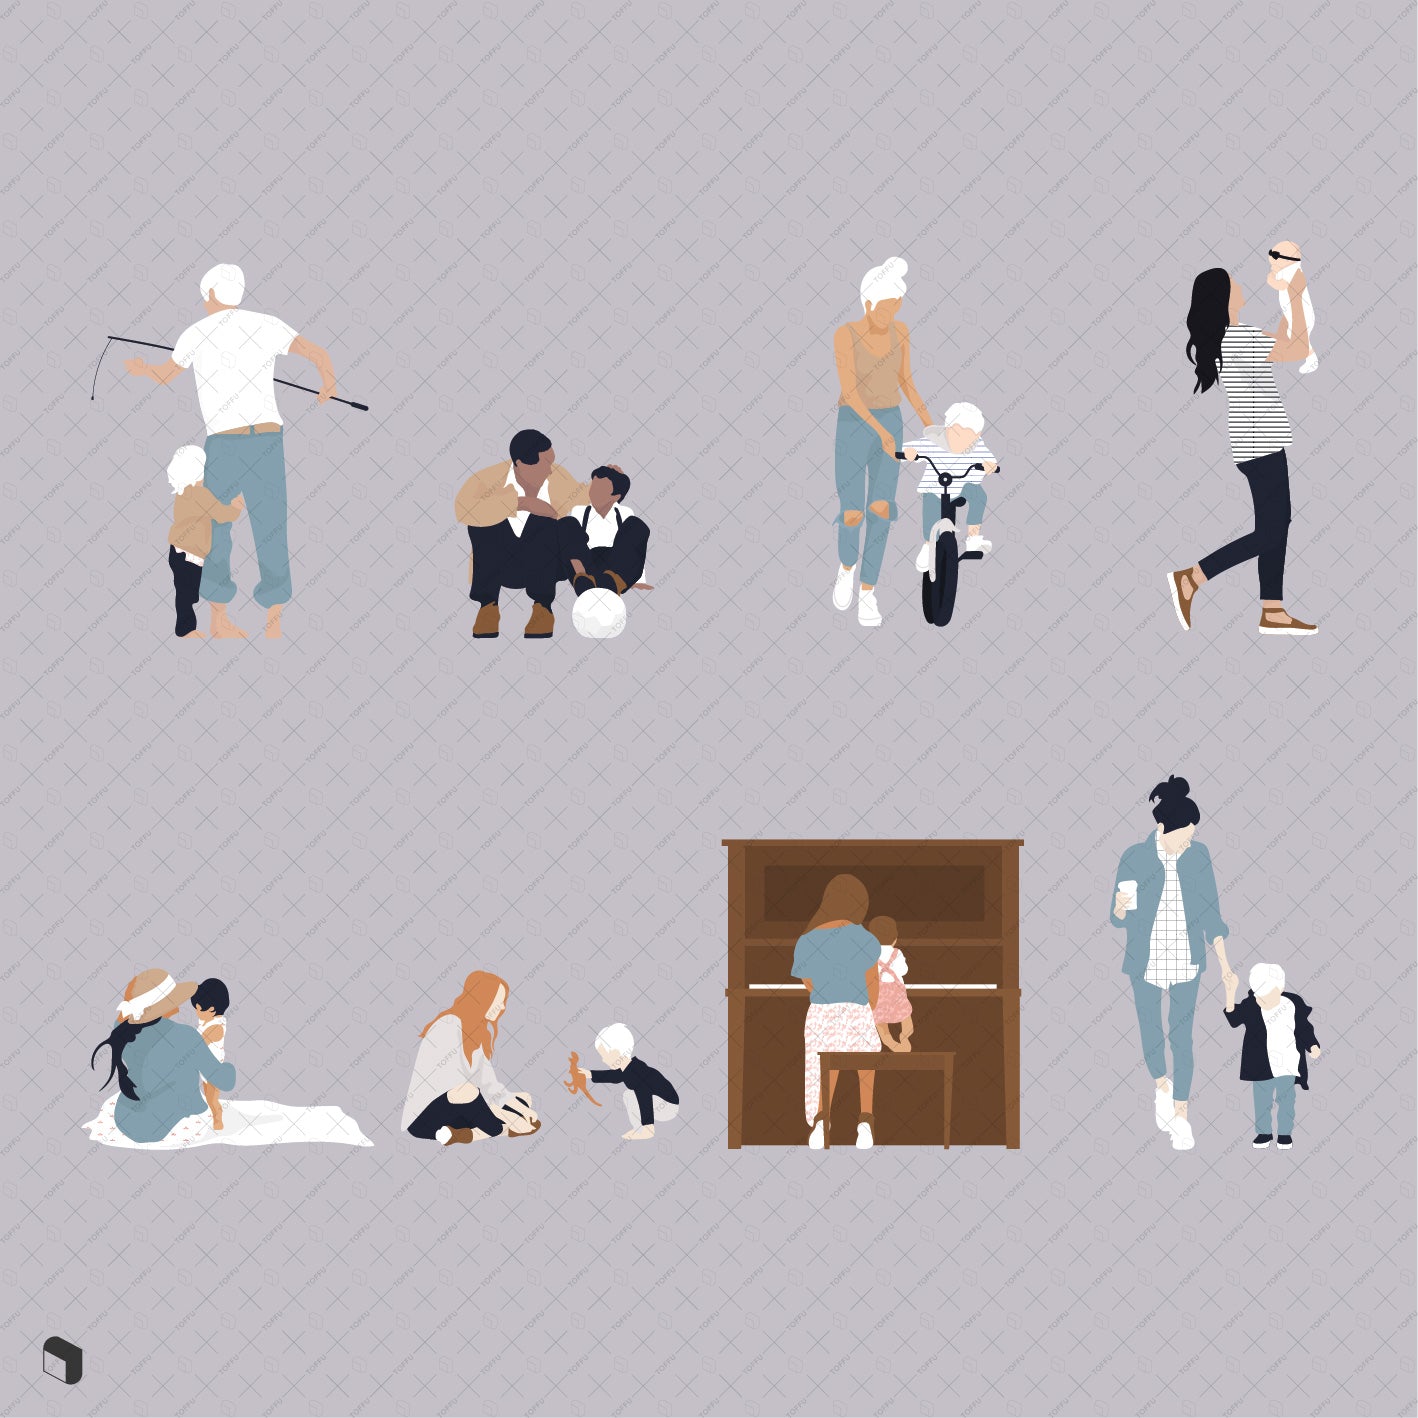 https://cdn.shopify.com/s/files/1/0491/8162/2439/products/pp_flatvector-people-family2.jpg?v=1607616895&width=2836